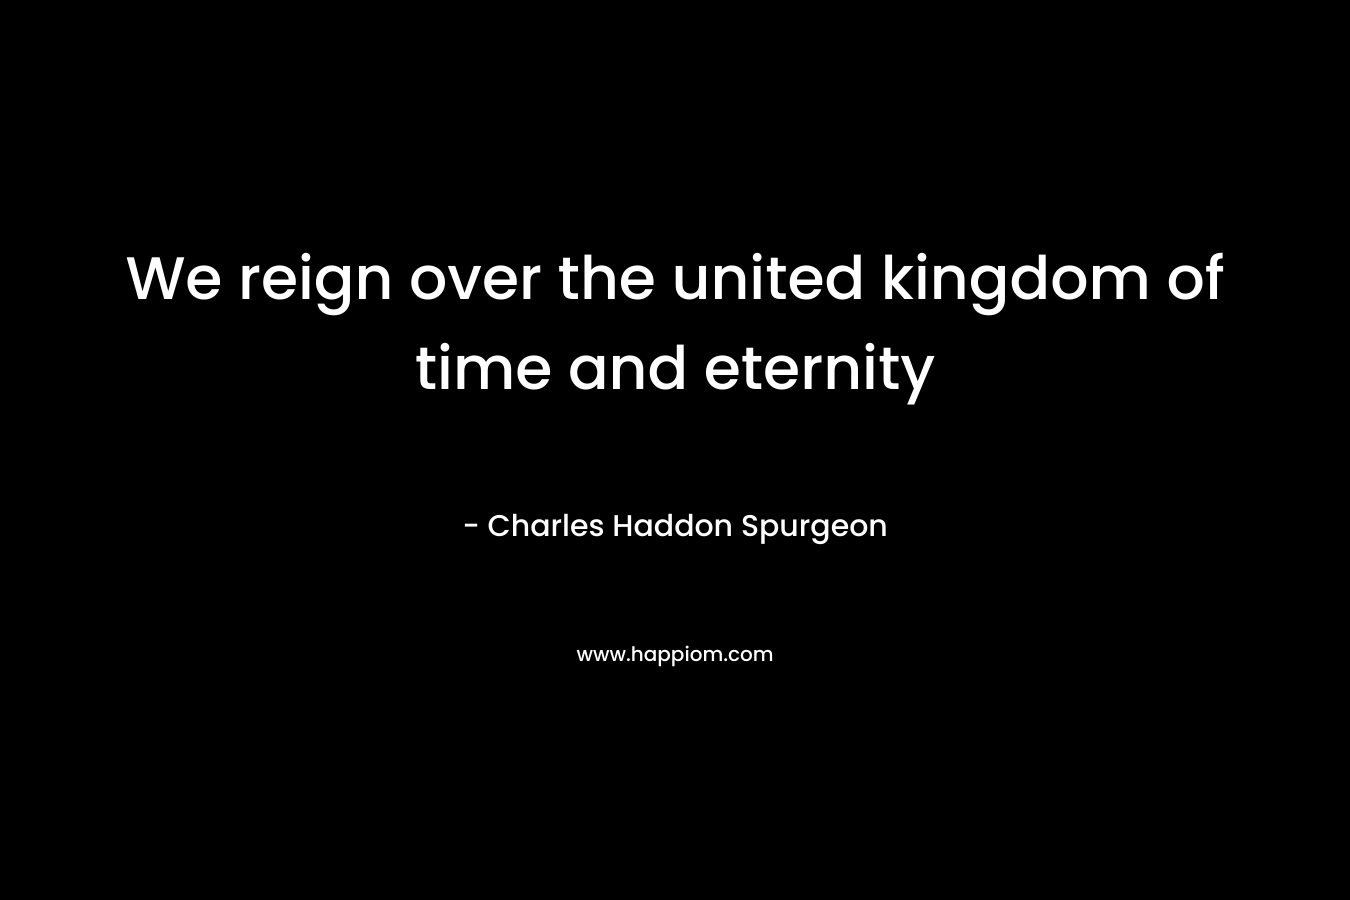 We reign over the united kingdom of time and eternity